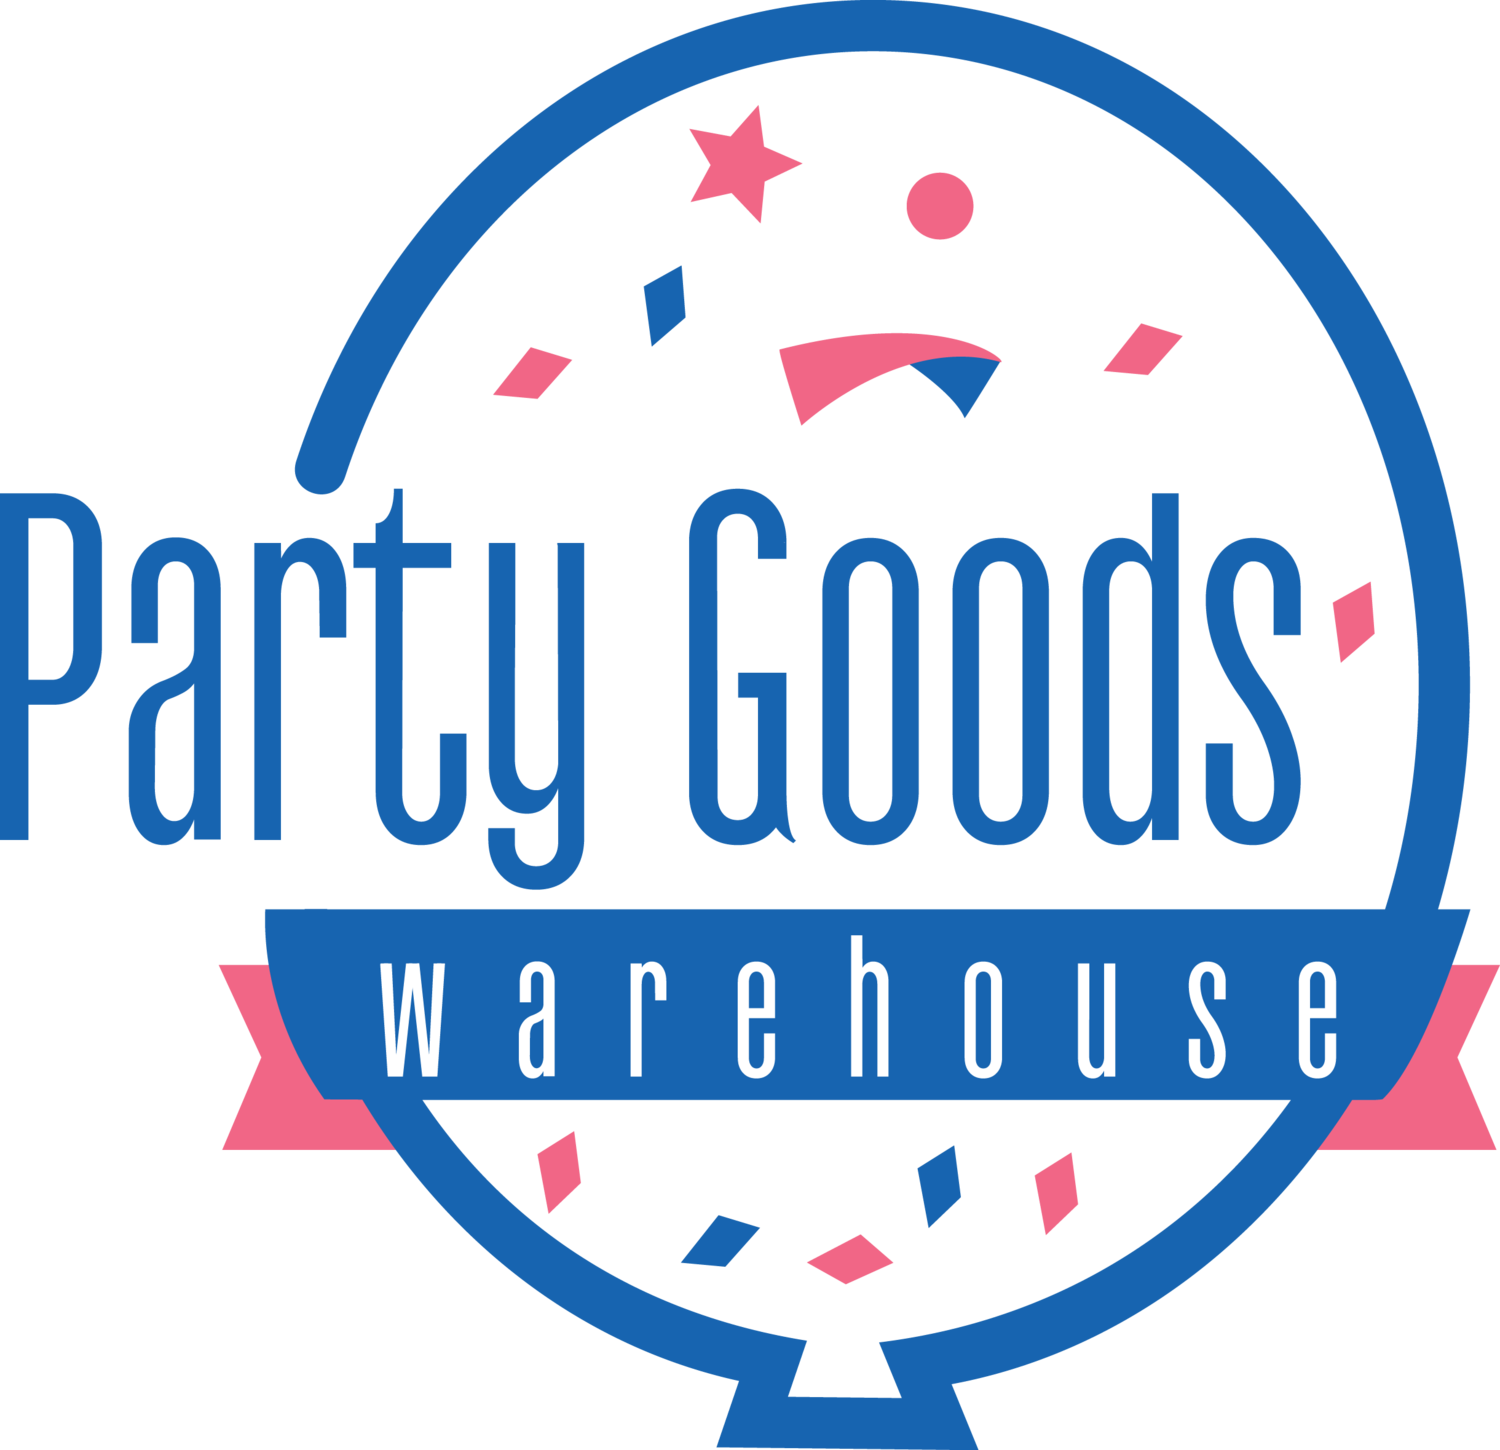 Party Goods Warehouse